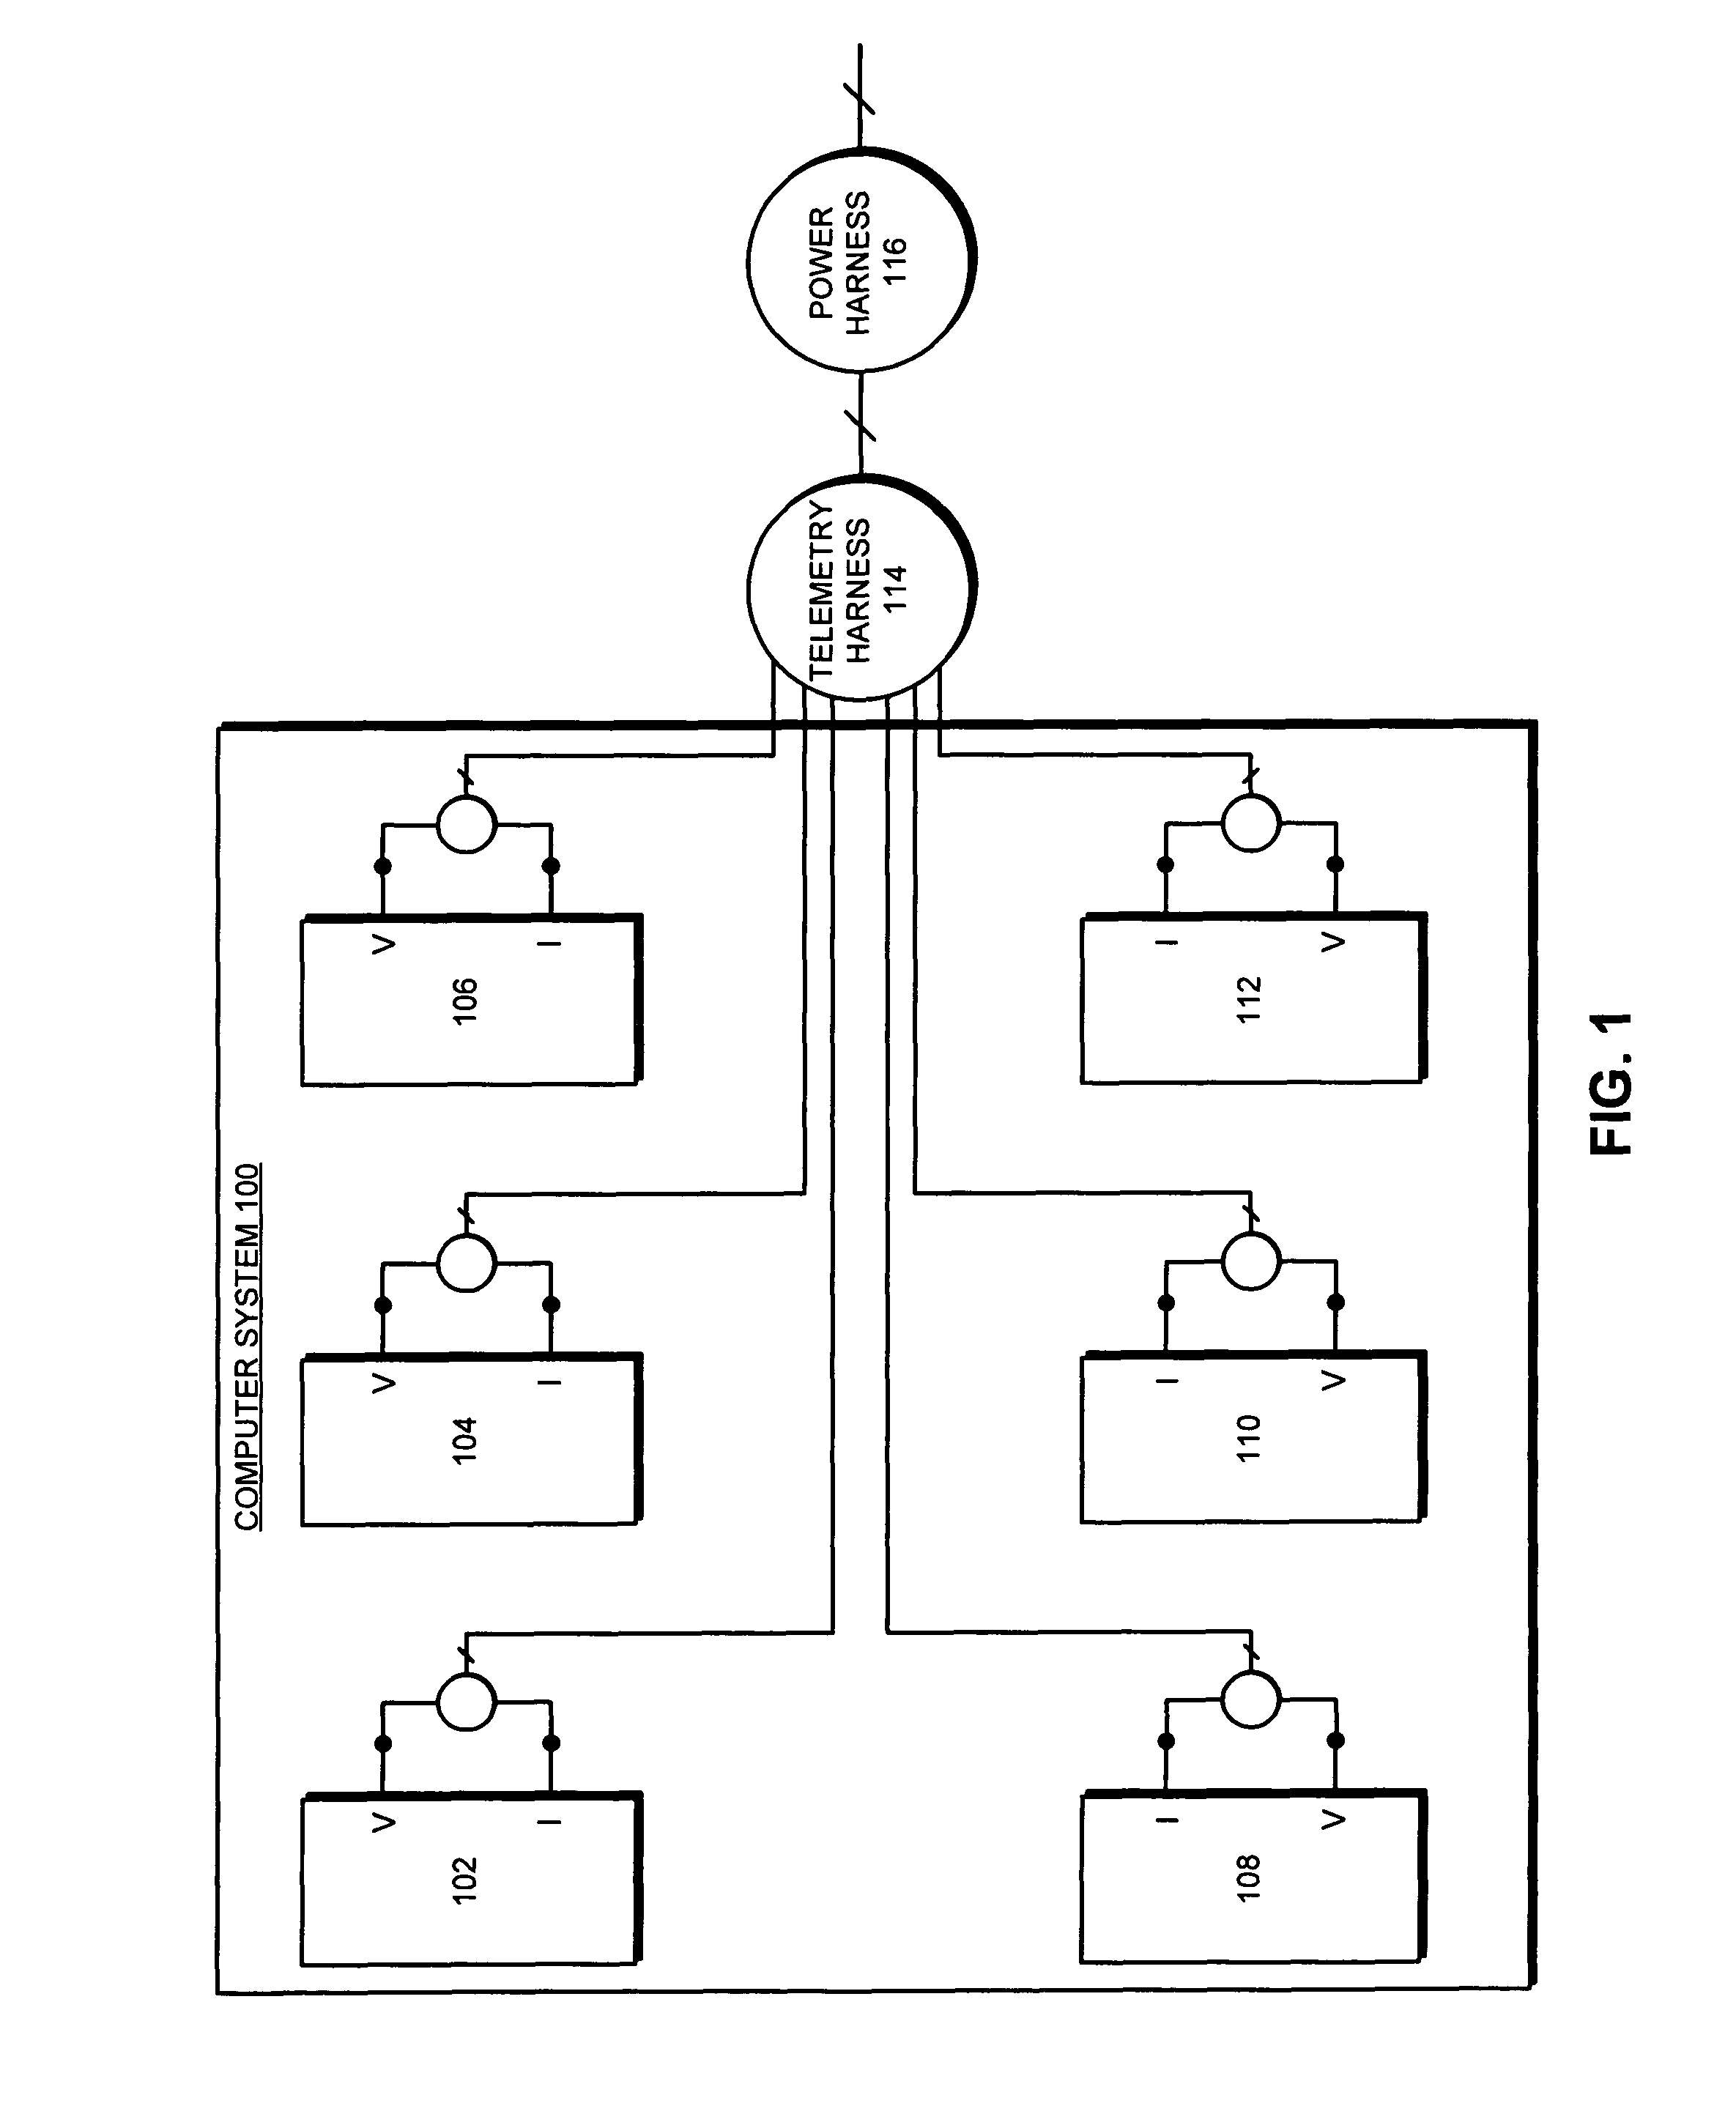 Method and apparatus for balancing thermal variations across a set of computer systems